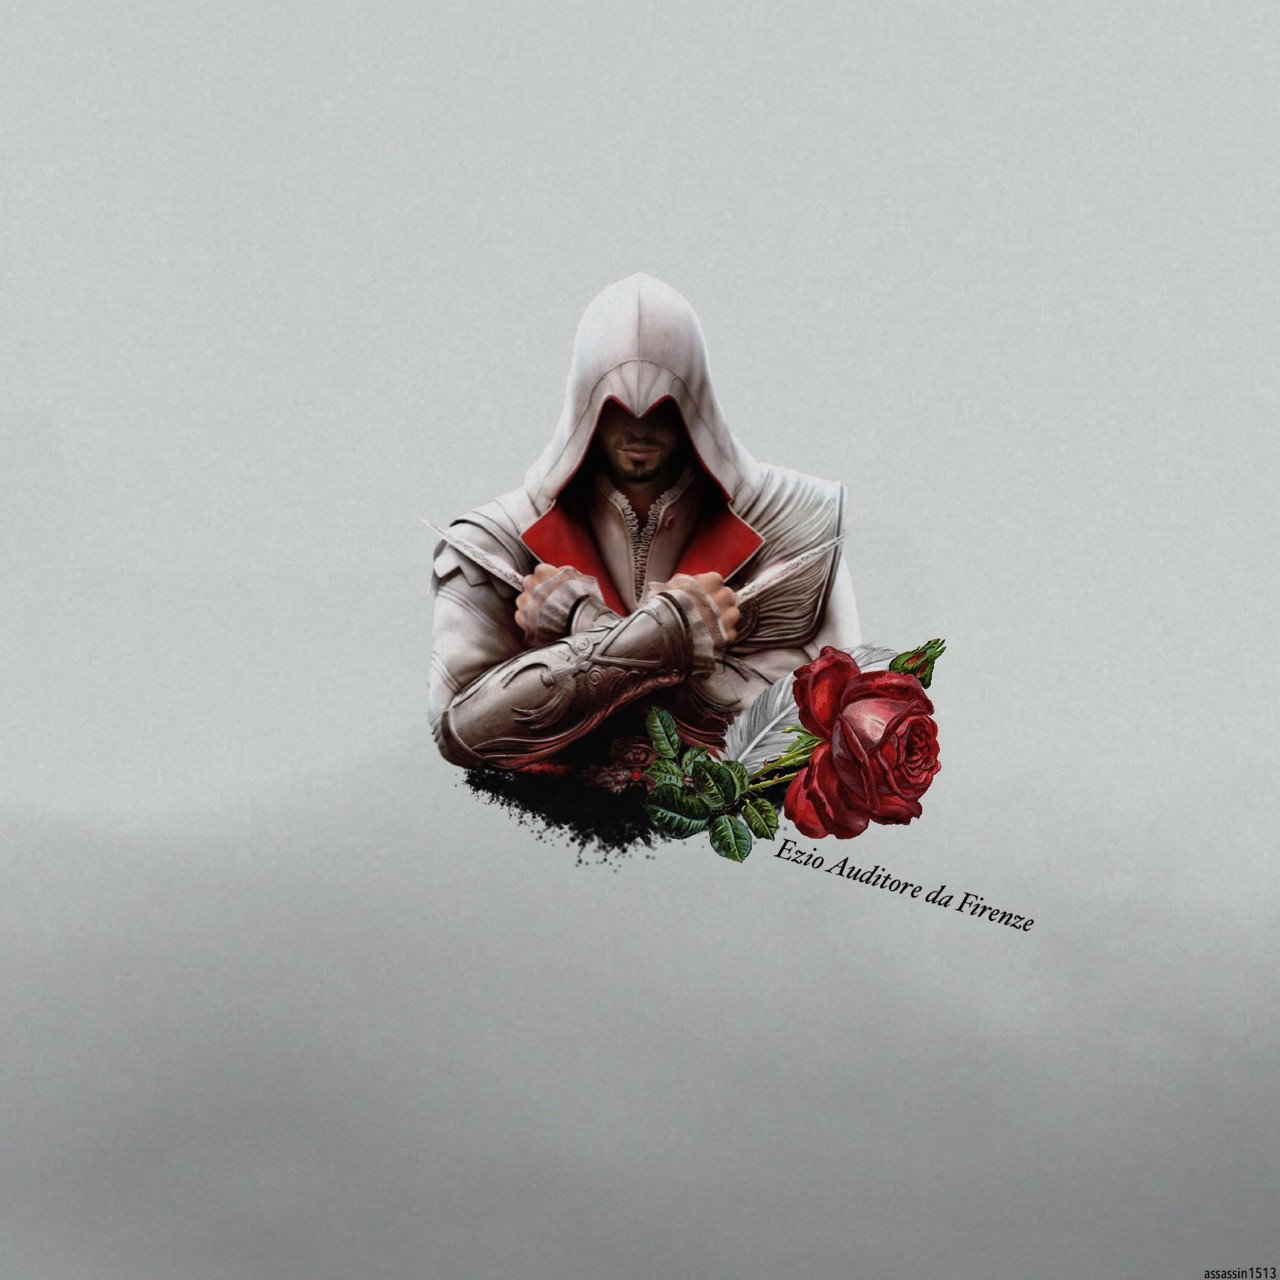 Watch the Photo by the5impleton with the username @the5impleton, who is a verified user, posted on December 14, 2017 and the text says 'assassin1513:

|Minimalistic Creed|
|Edits made by me :)| #assassin's  #creed  #syndicate  #assassins  #creed  #syndicate  #assassins  #creed  #unity  #assassins  #creed  #rogue  #assassins  #creed  #assassin's  #creed  #assassins  #creed  #1  #assassins ..'